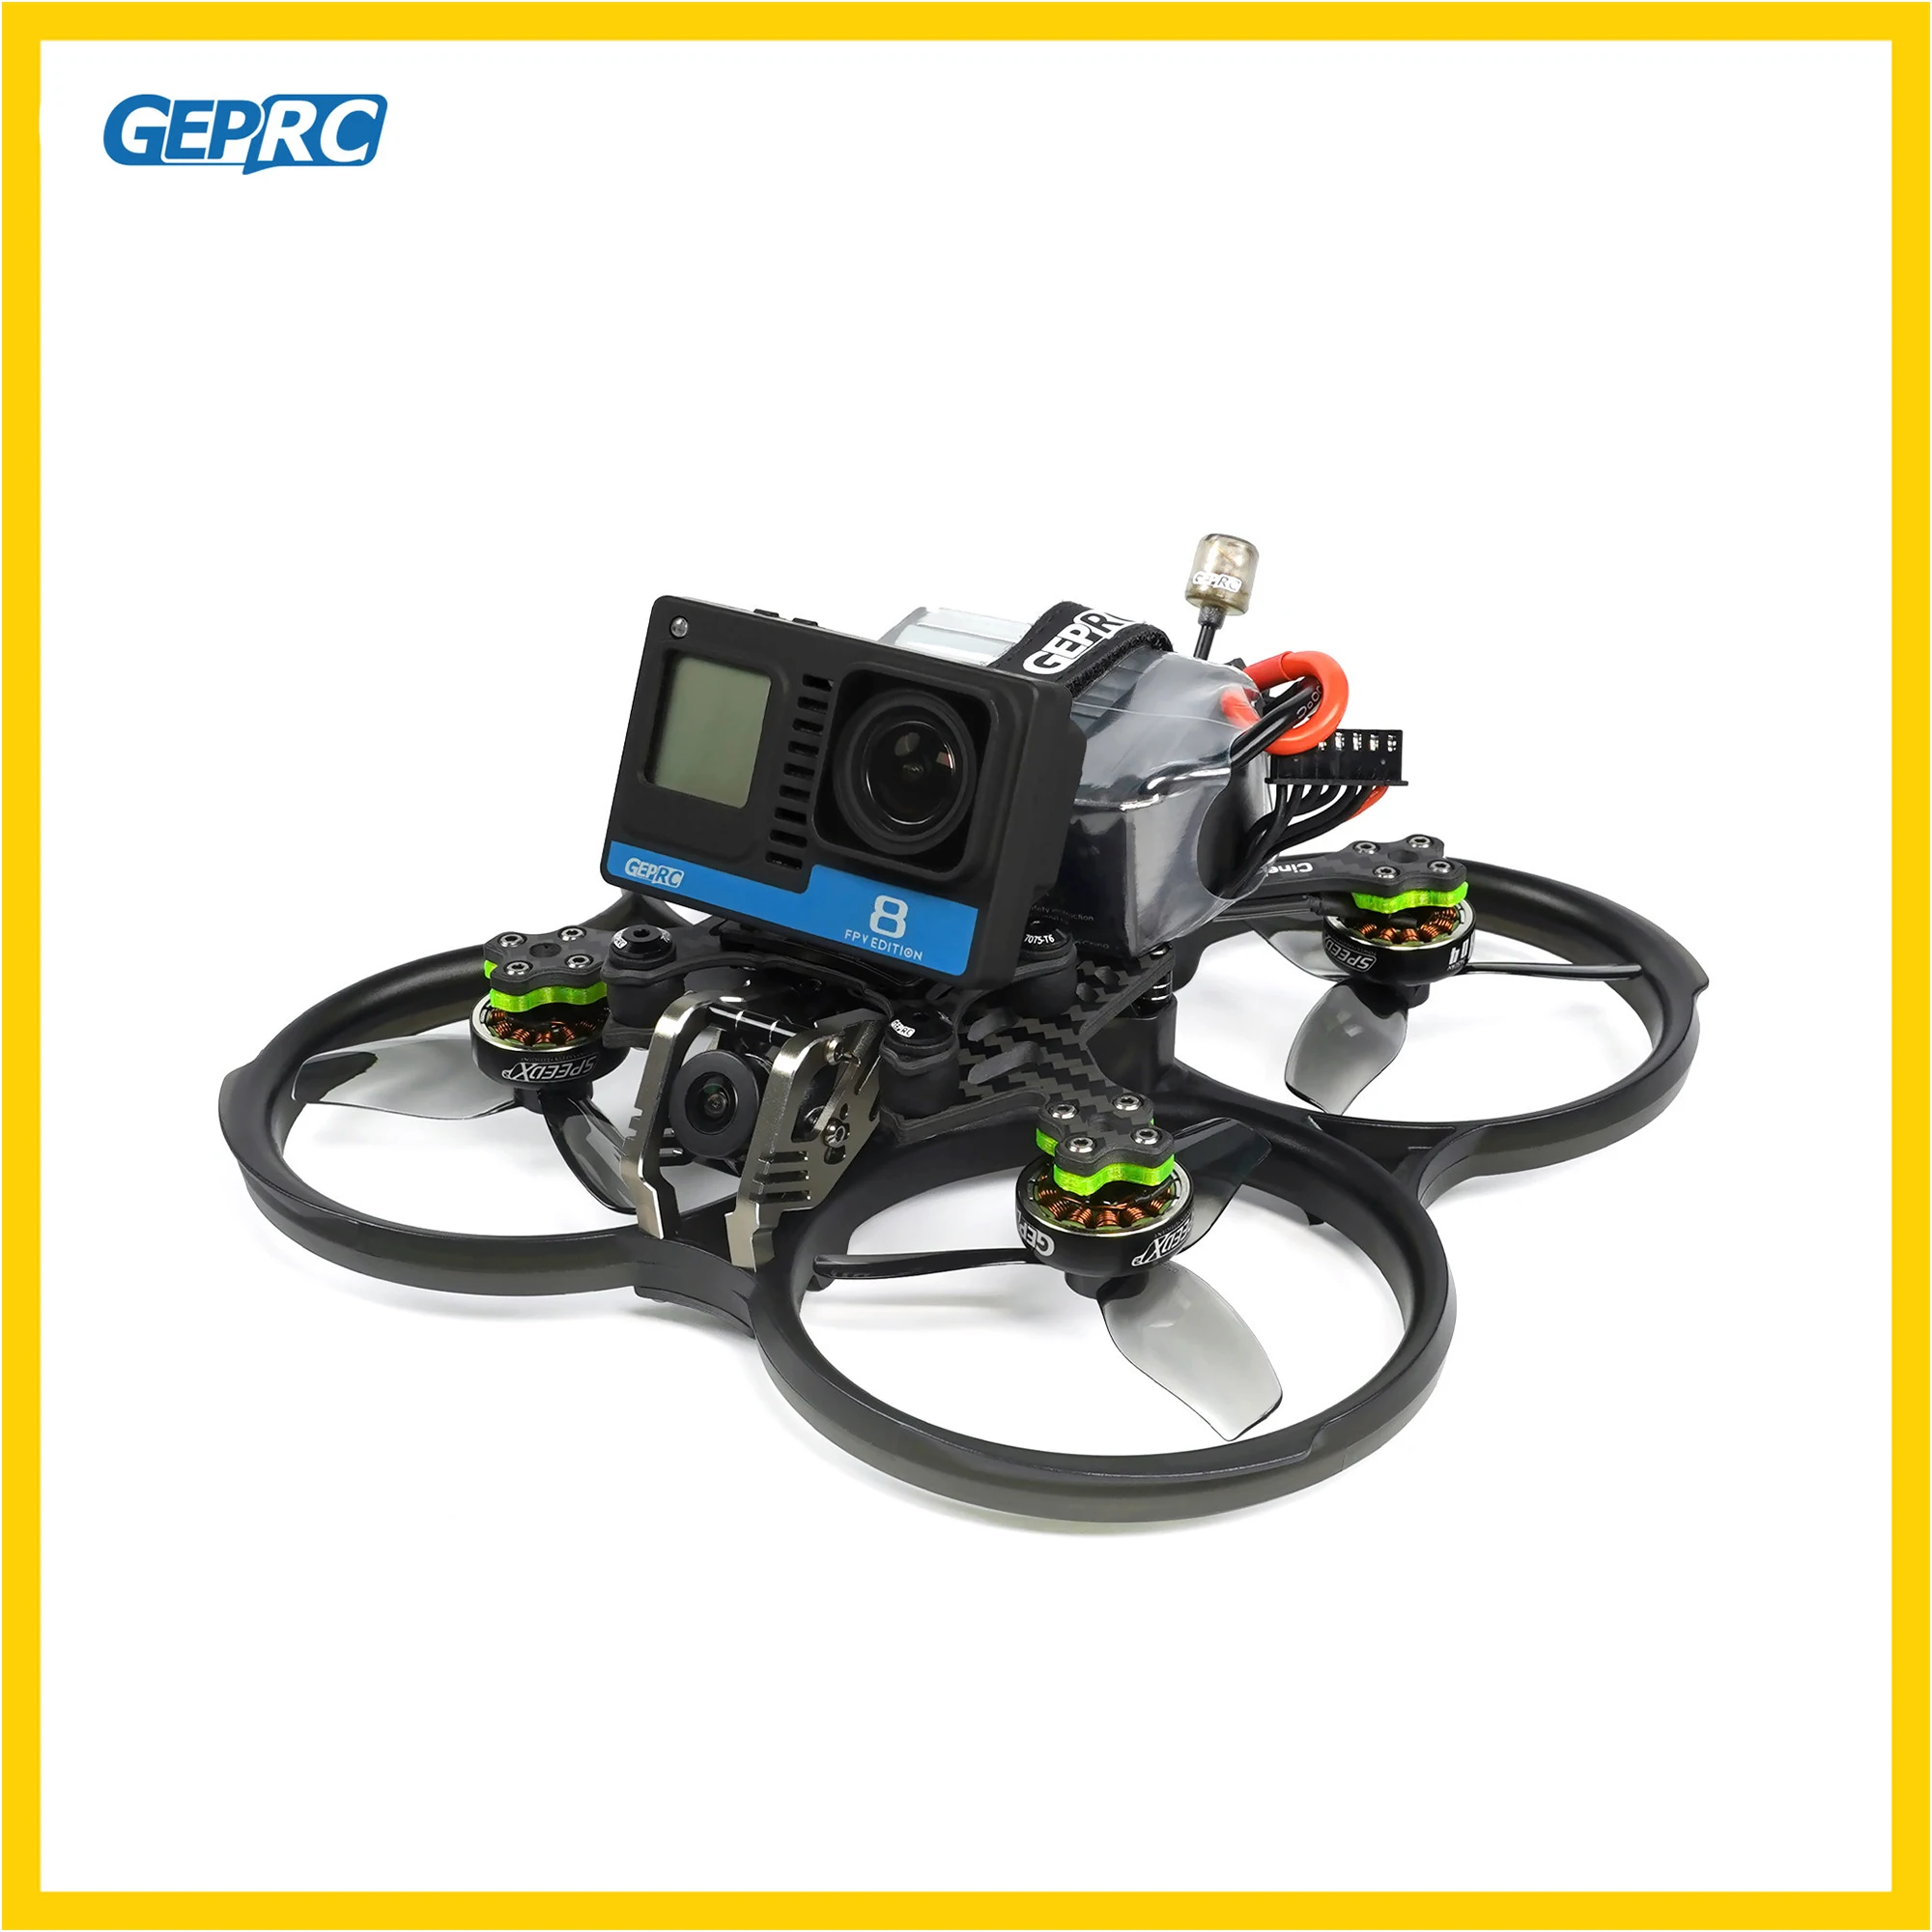 

GEPRC Cinebot30 Quadcopter HD 3inch 6S FPV Drone ELRS 2.4 G / TBS Nano RX COB Lamp with HD Caddx Vista Nebula PRO System for FPV